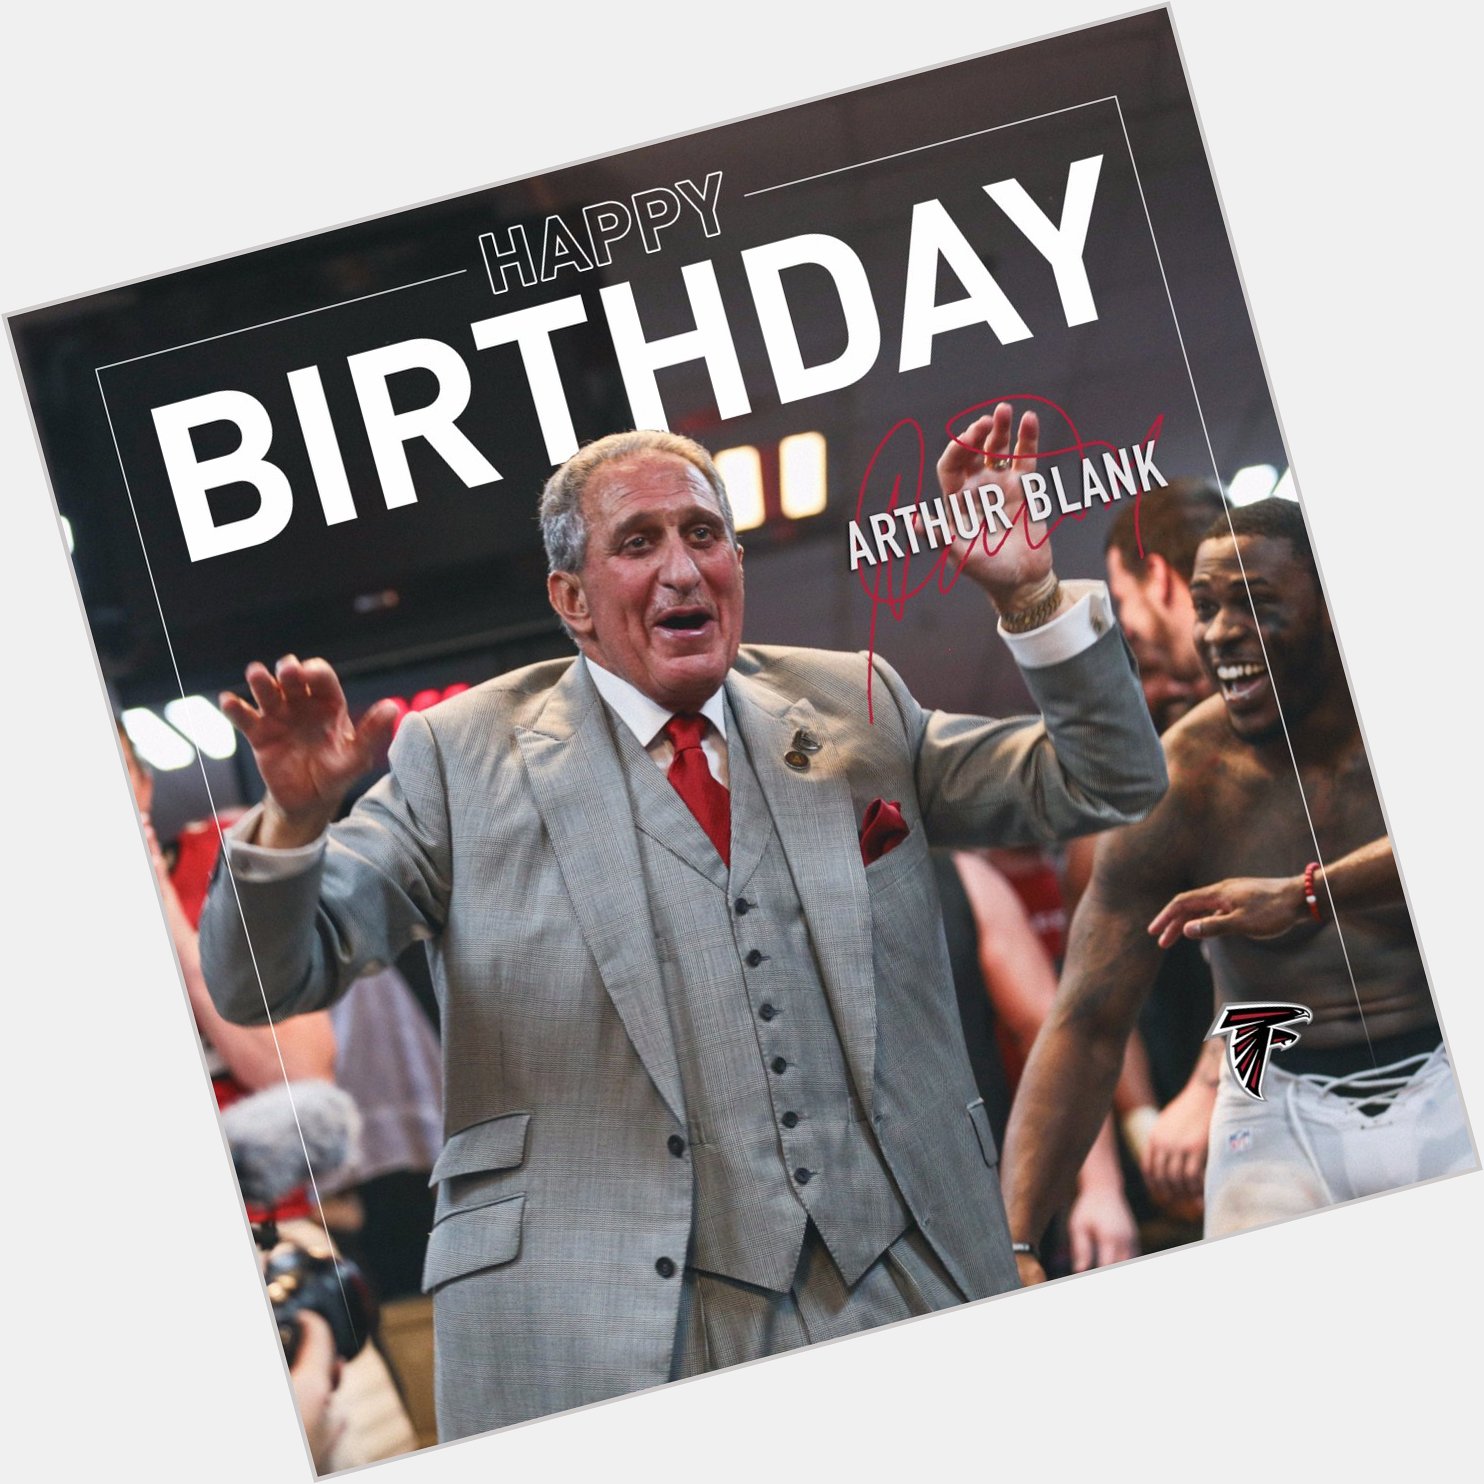 Happy birthday to our owner Arthur Blank!

Thank you for everything you do for our organization! 